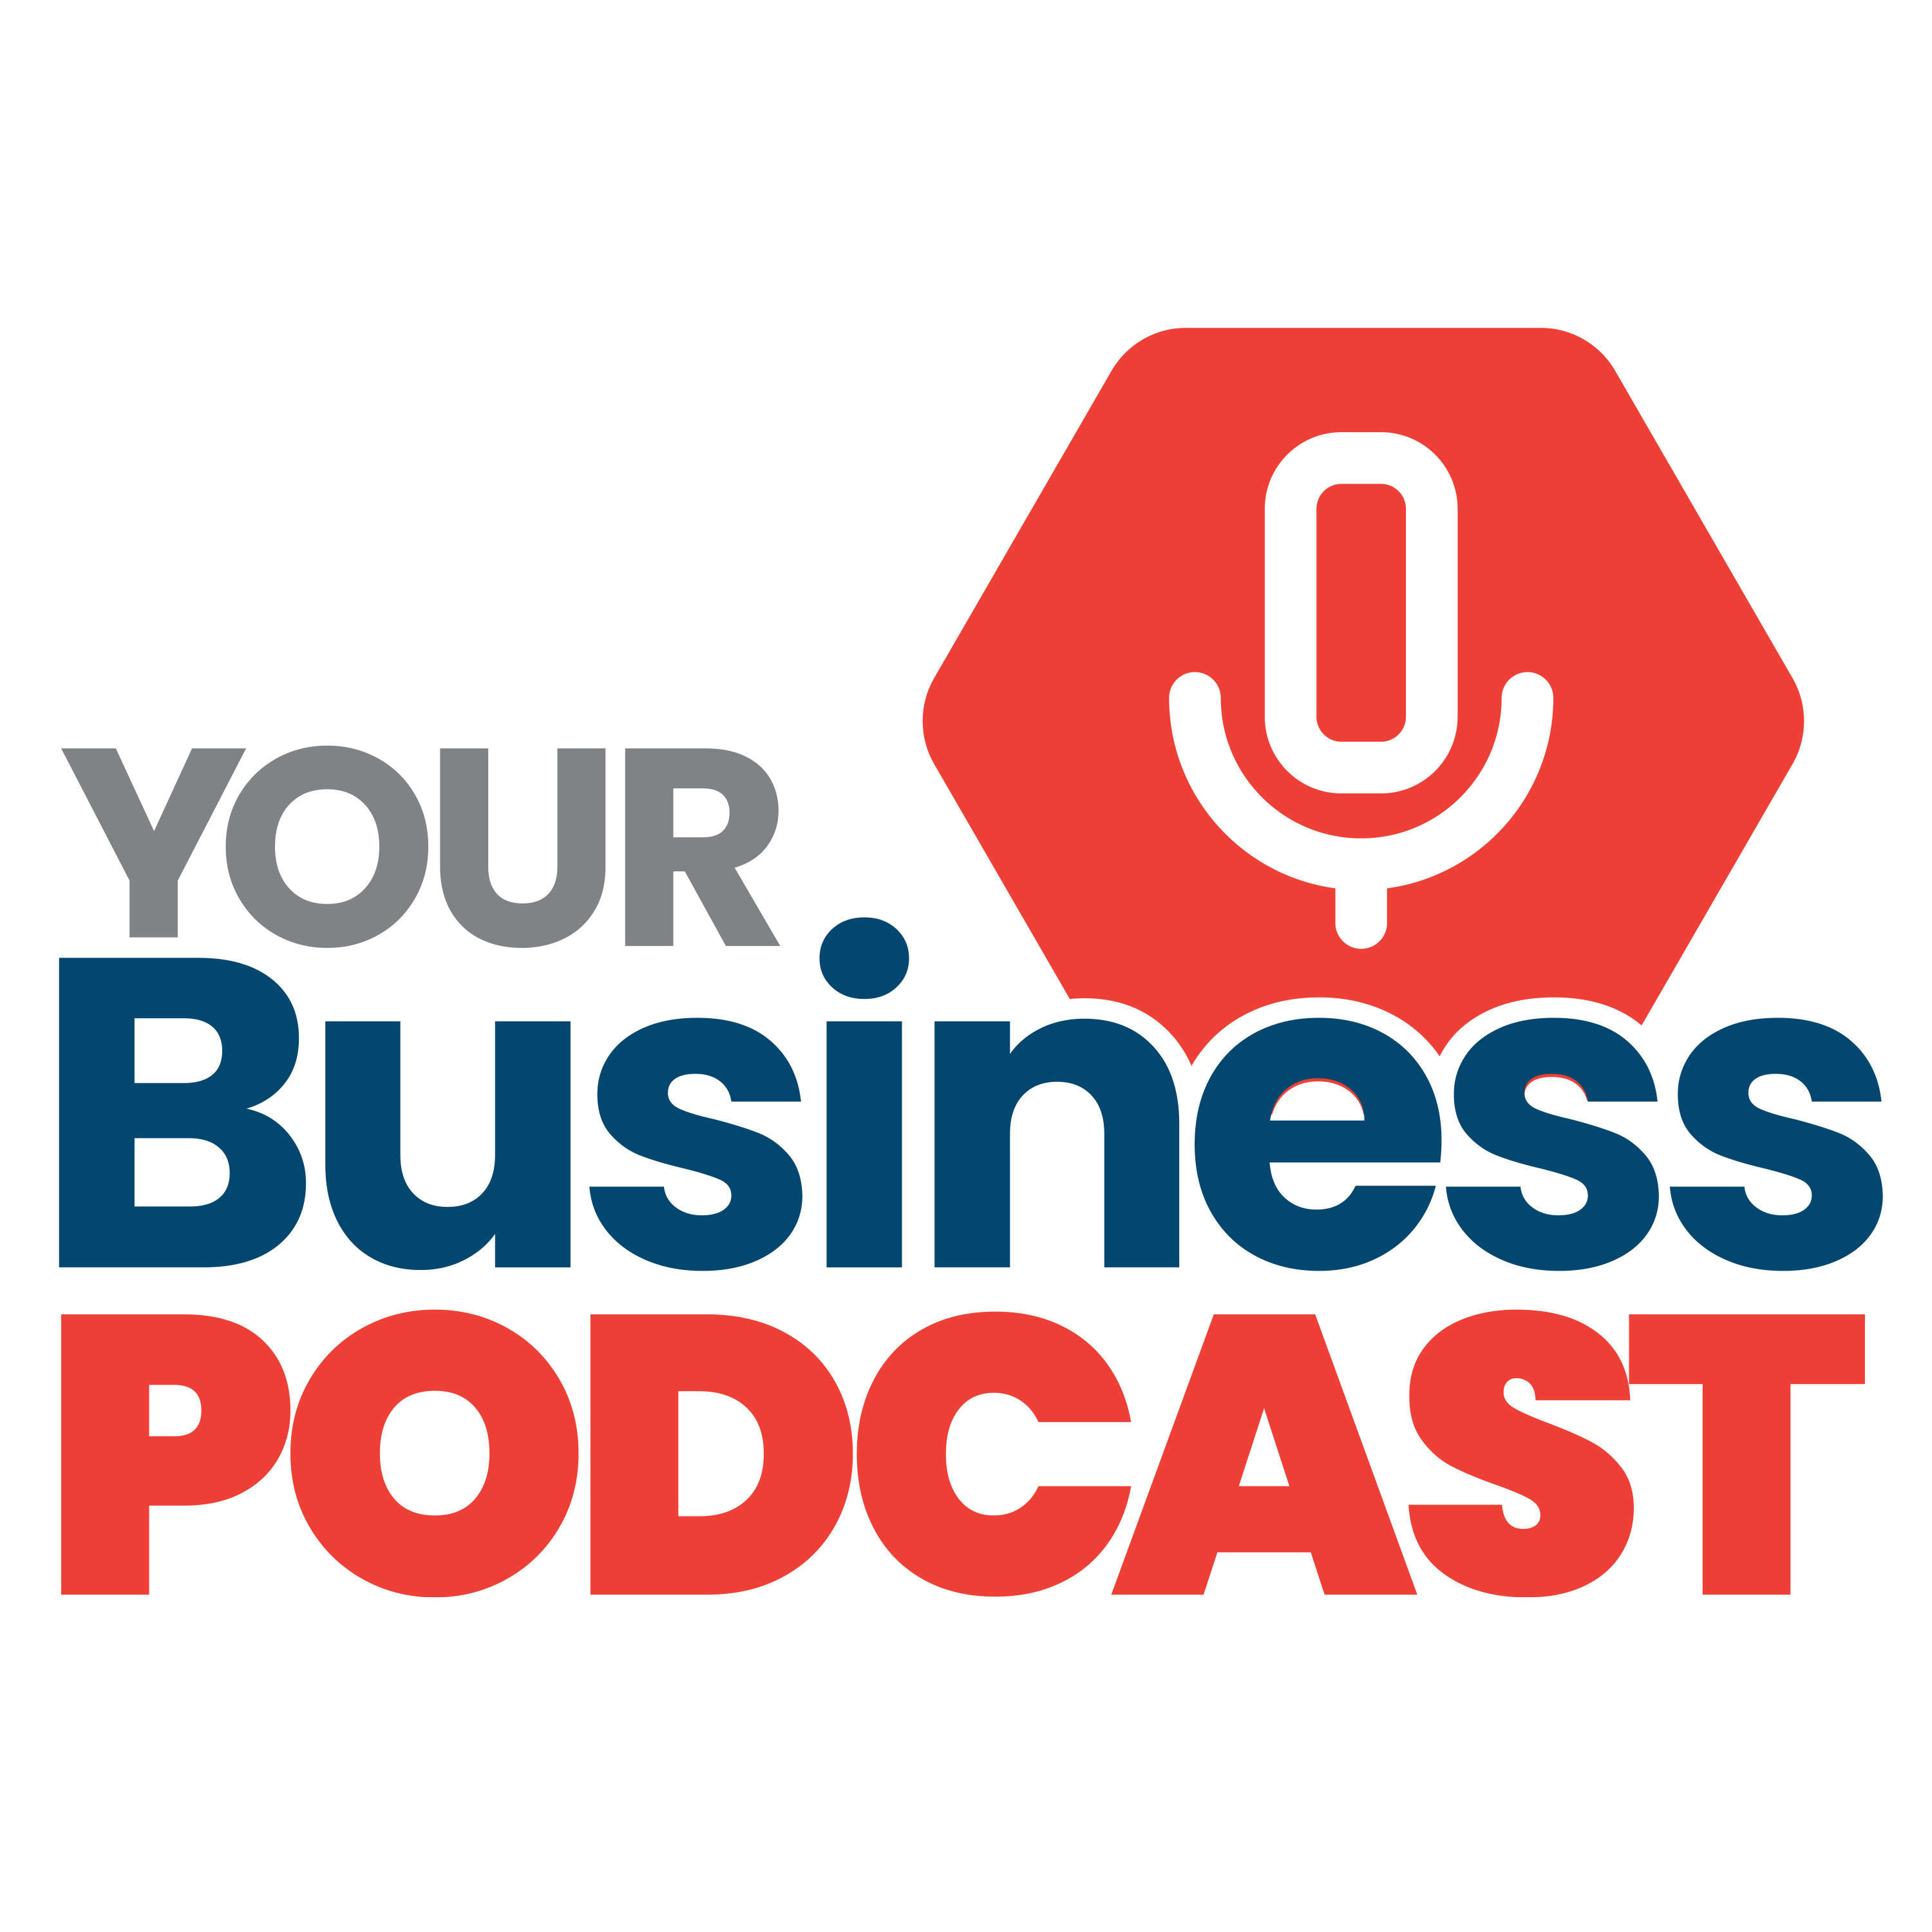 Your Business Podcast